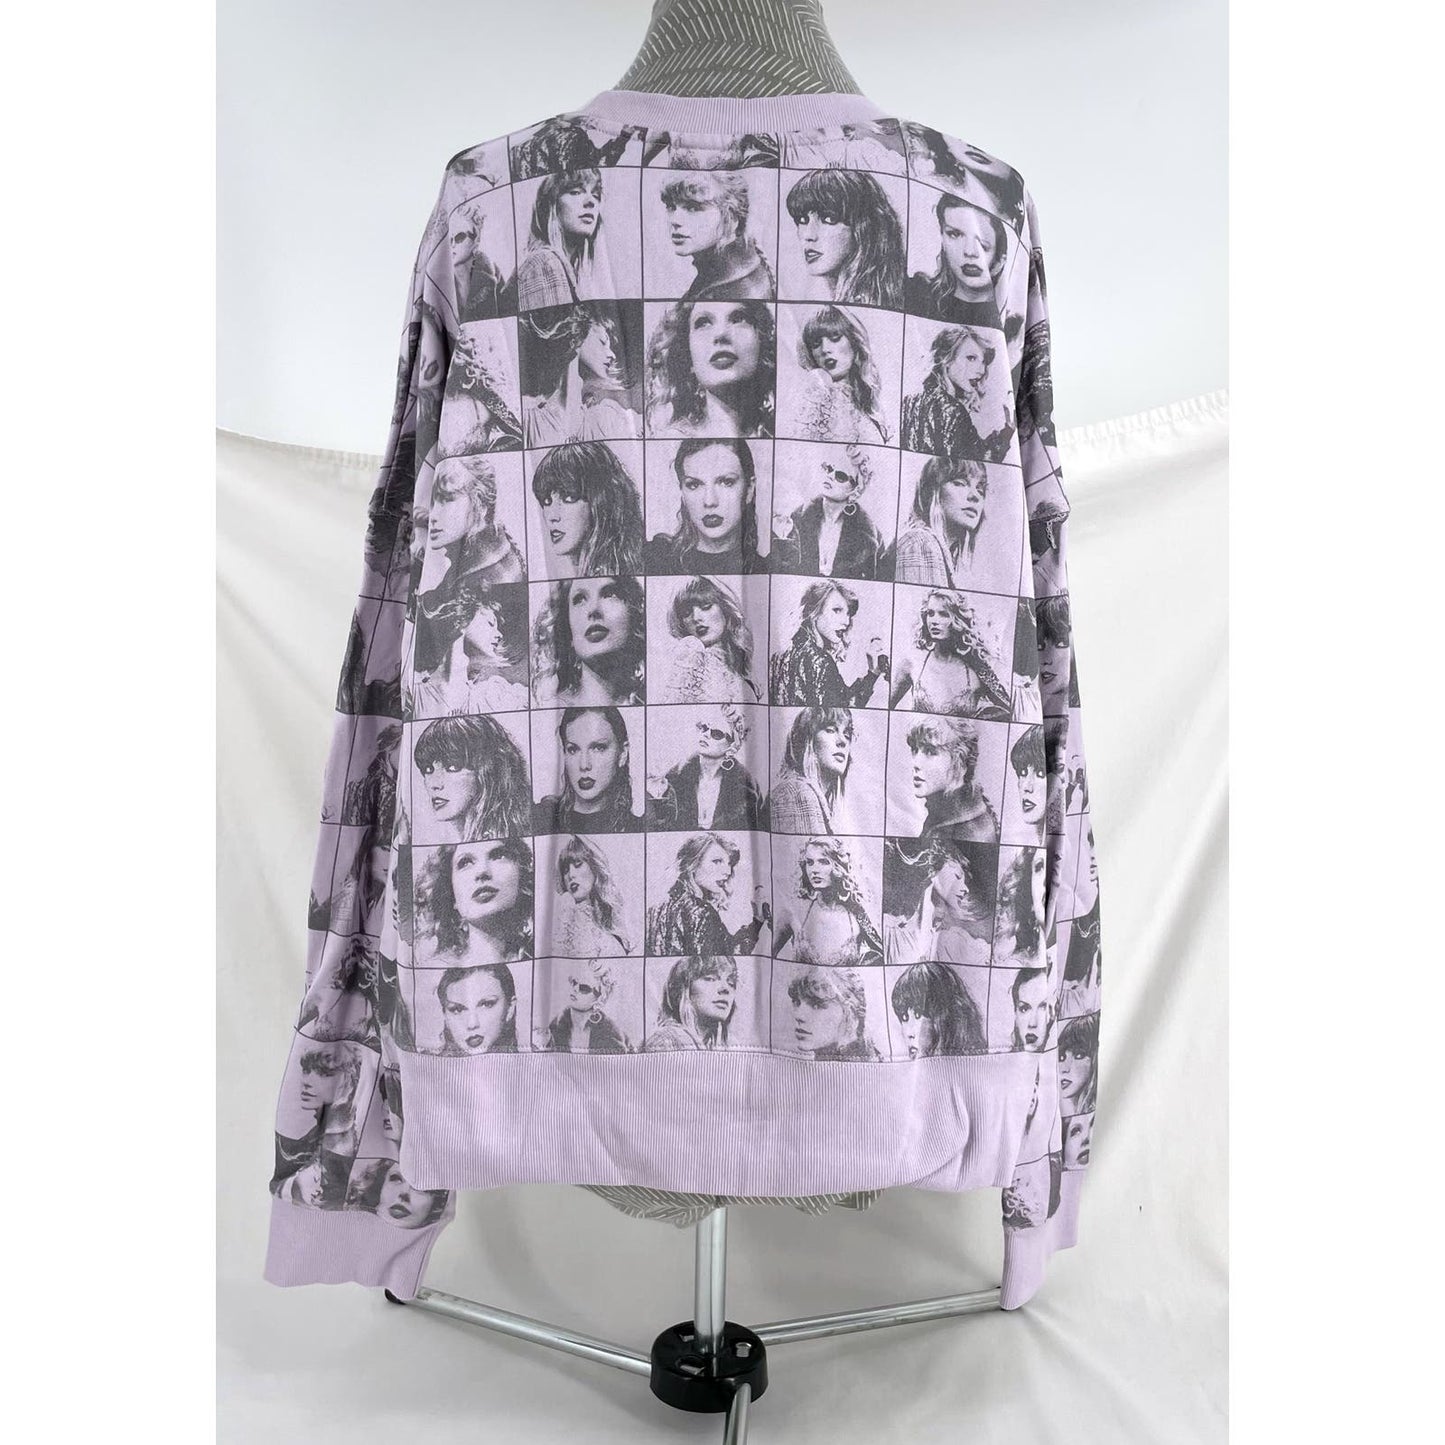 Taylor Swift Eras Tour Cropped Lavender Pullover Sweatshirt All Over Print Size XL